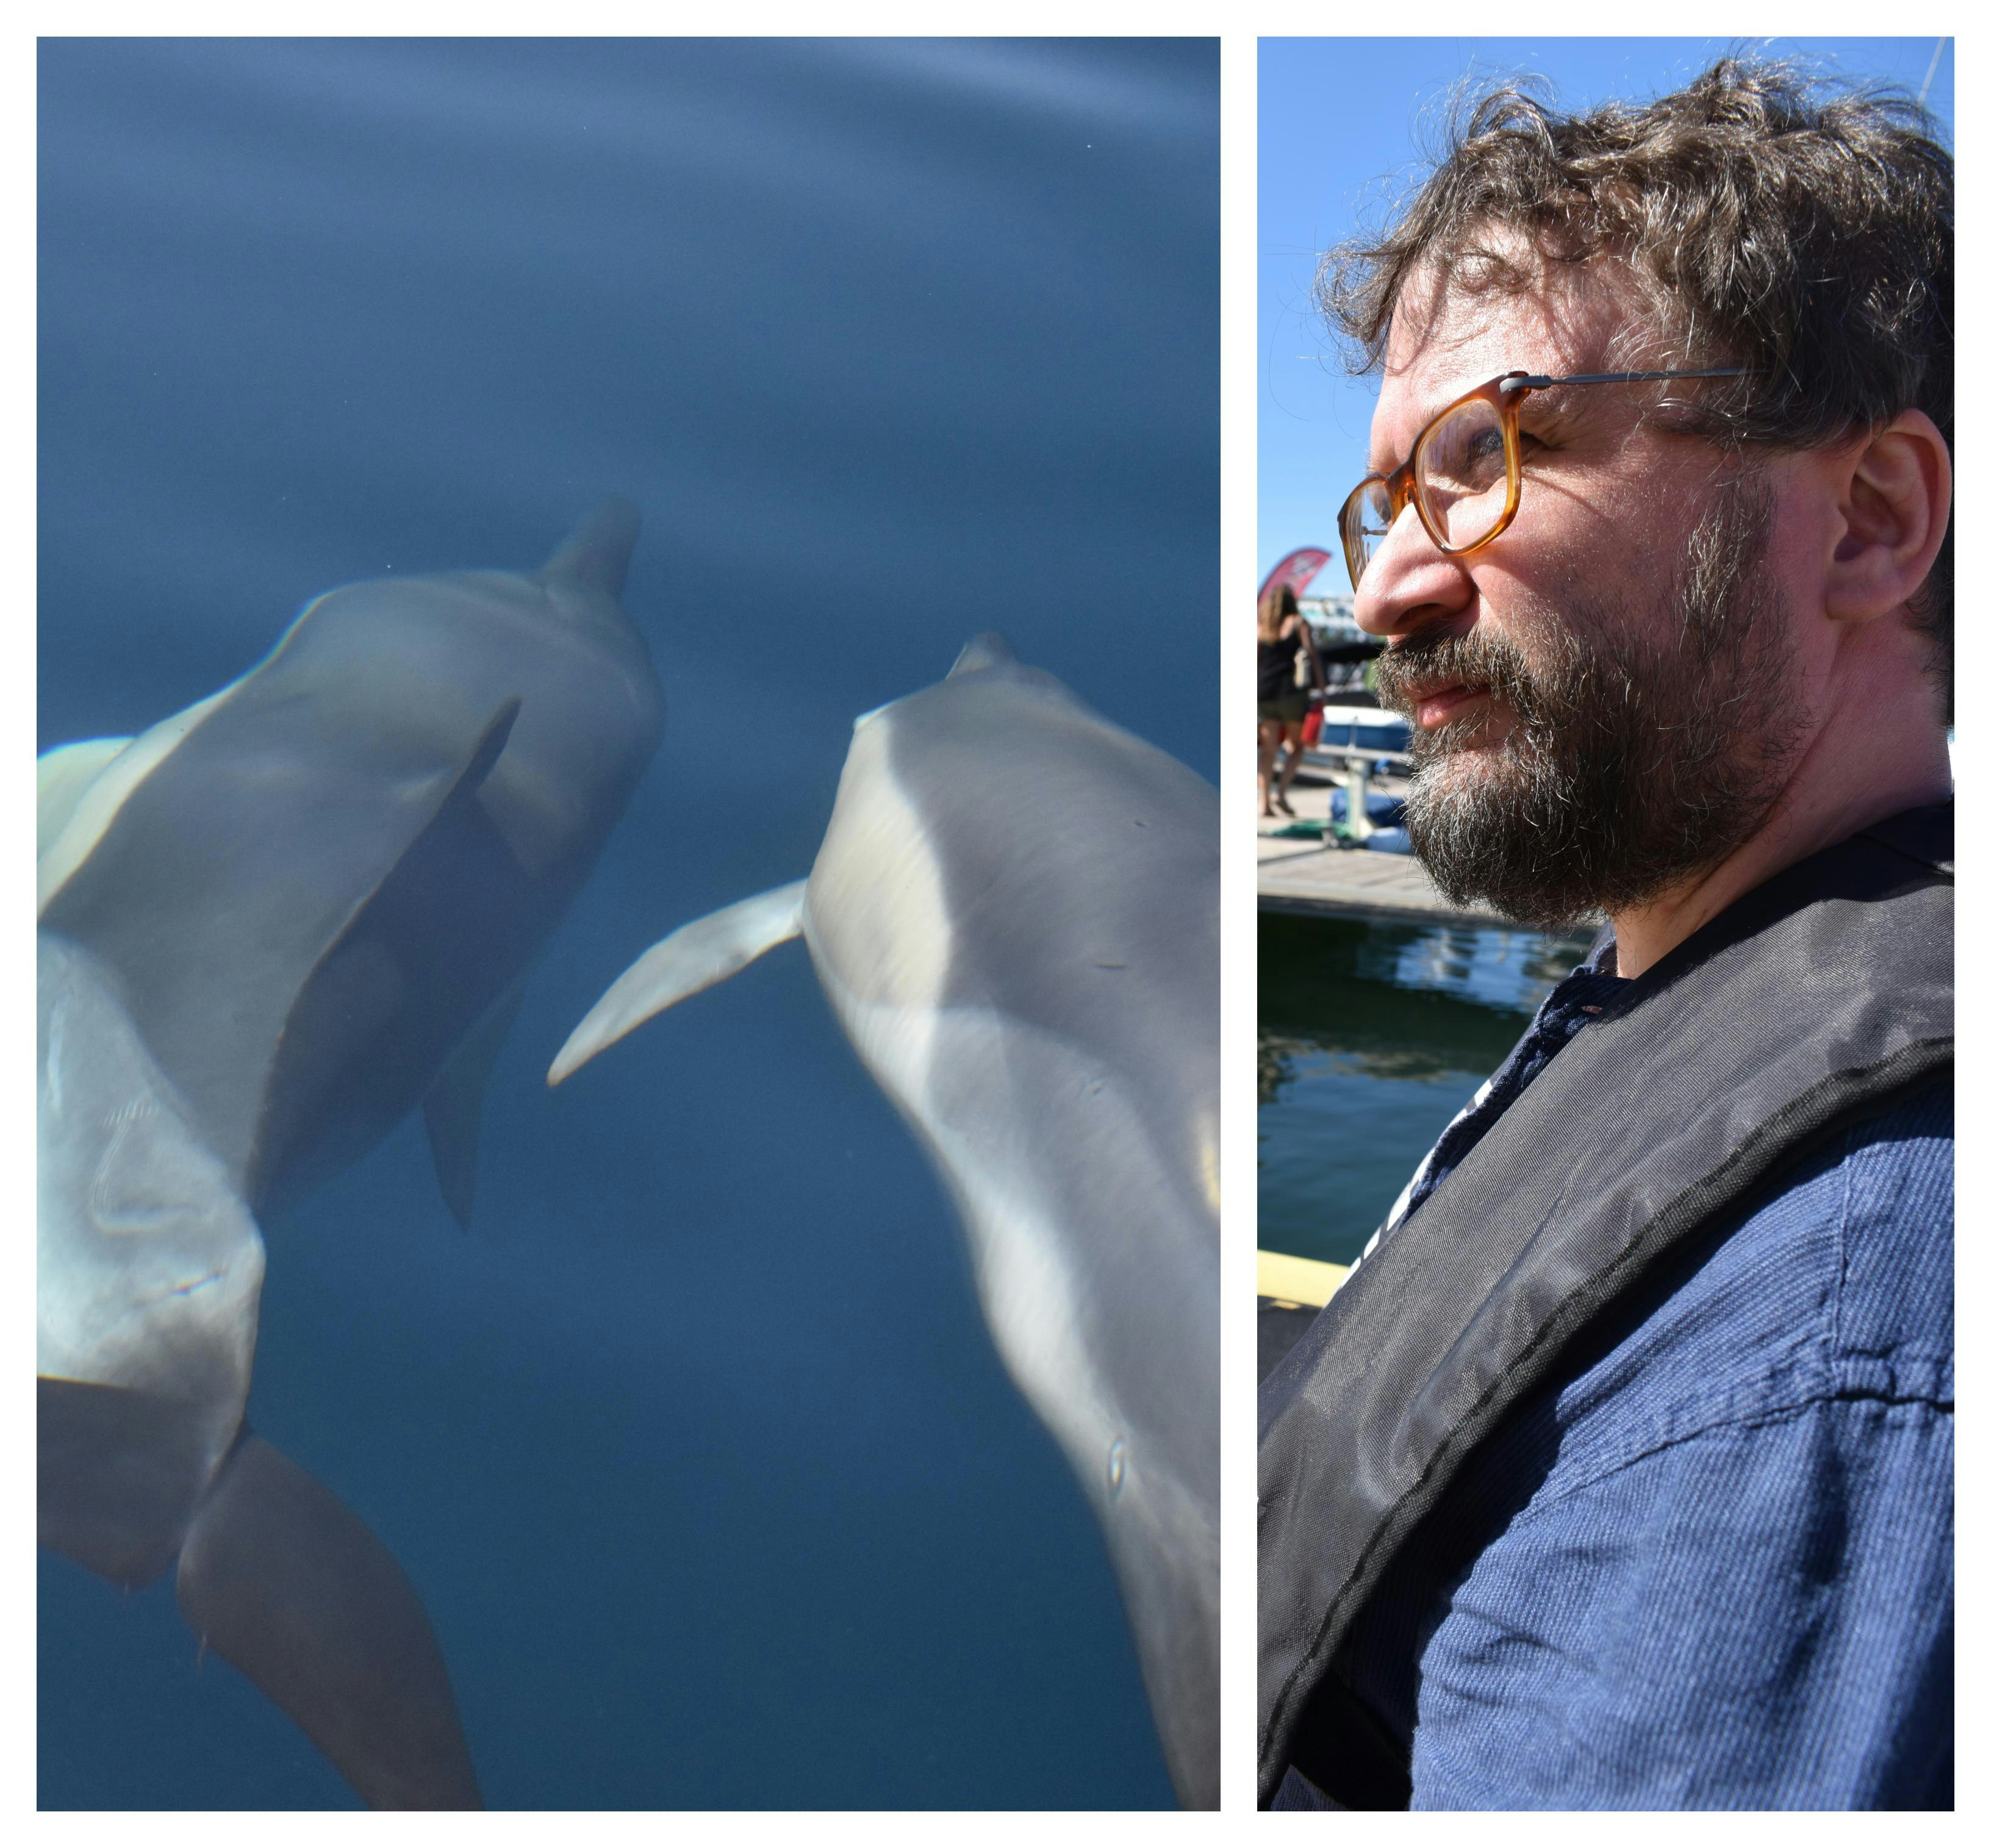 On the left, two dolphins swim in the water. On the right a close-up of the author in a boat wearing a life jacket.